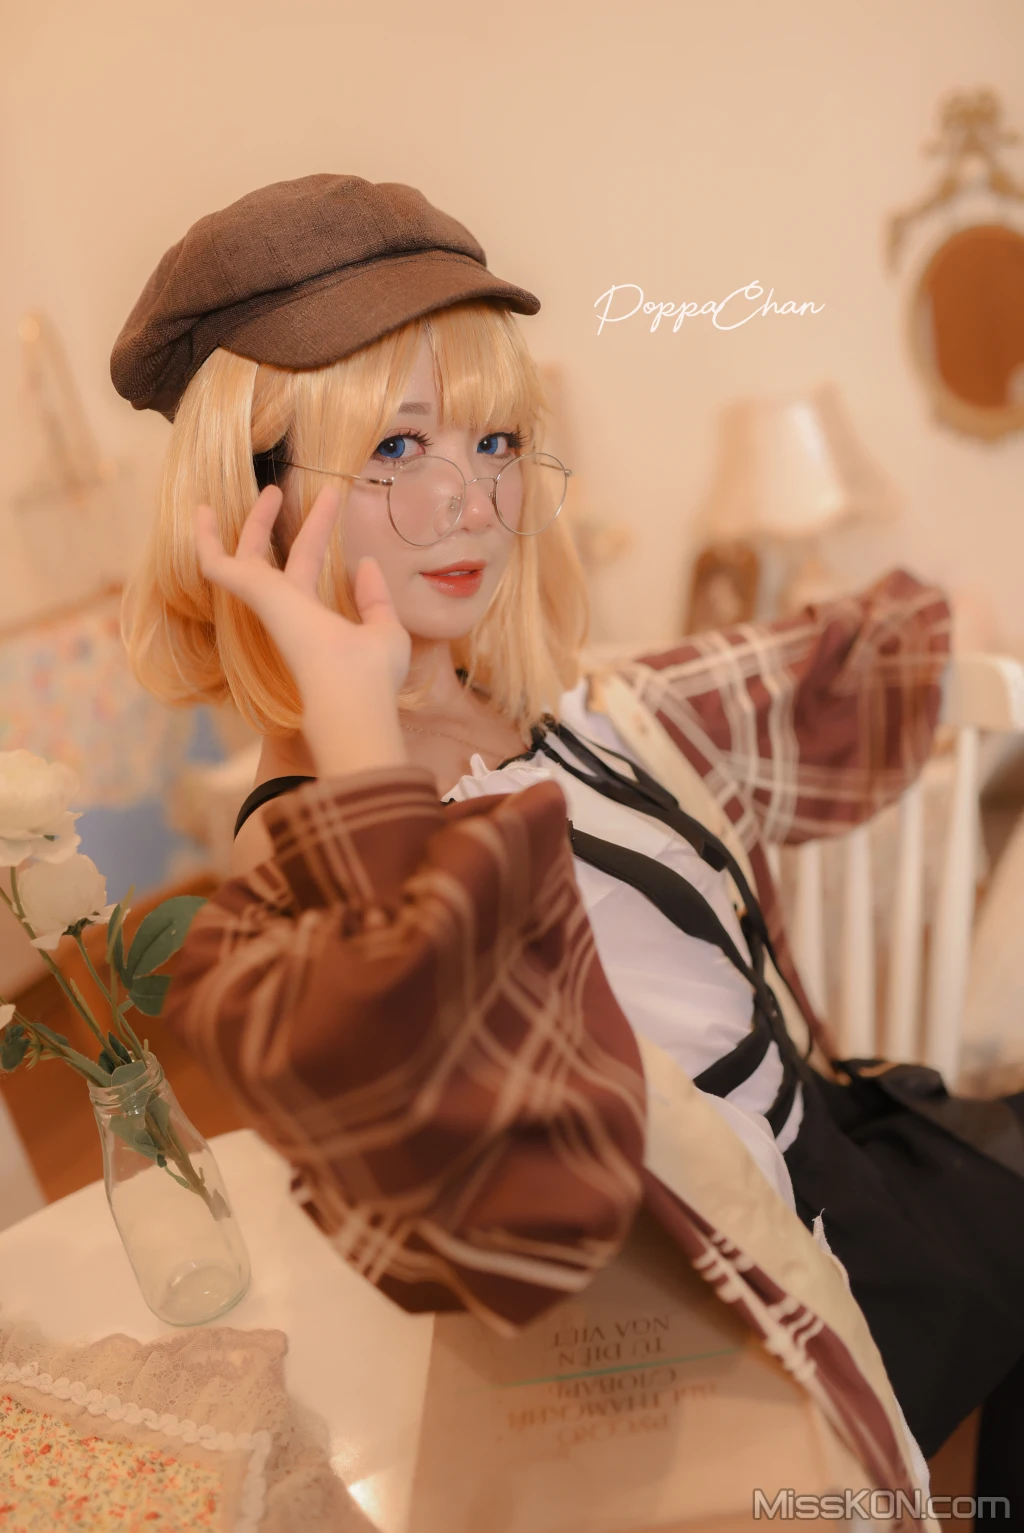 Coser@PoppaChan: Amelia Watson Casual Clothes Version (50 图 + 10 视频) –插图9